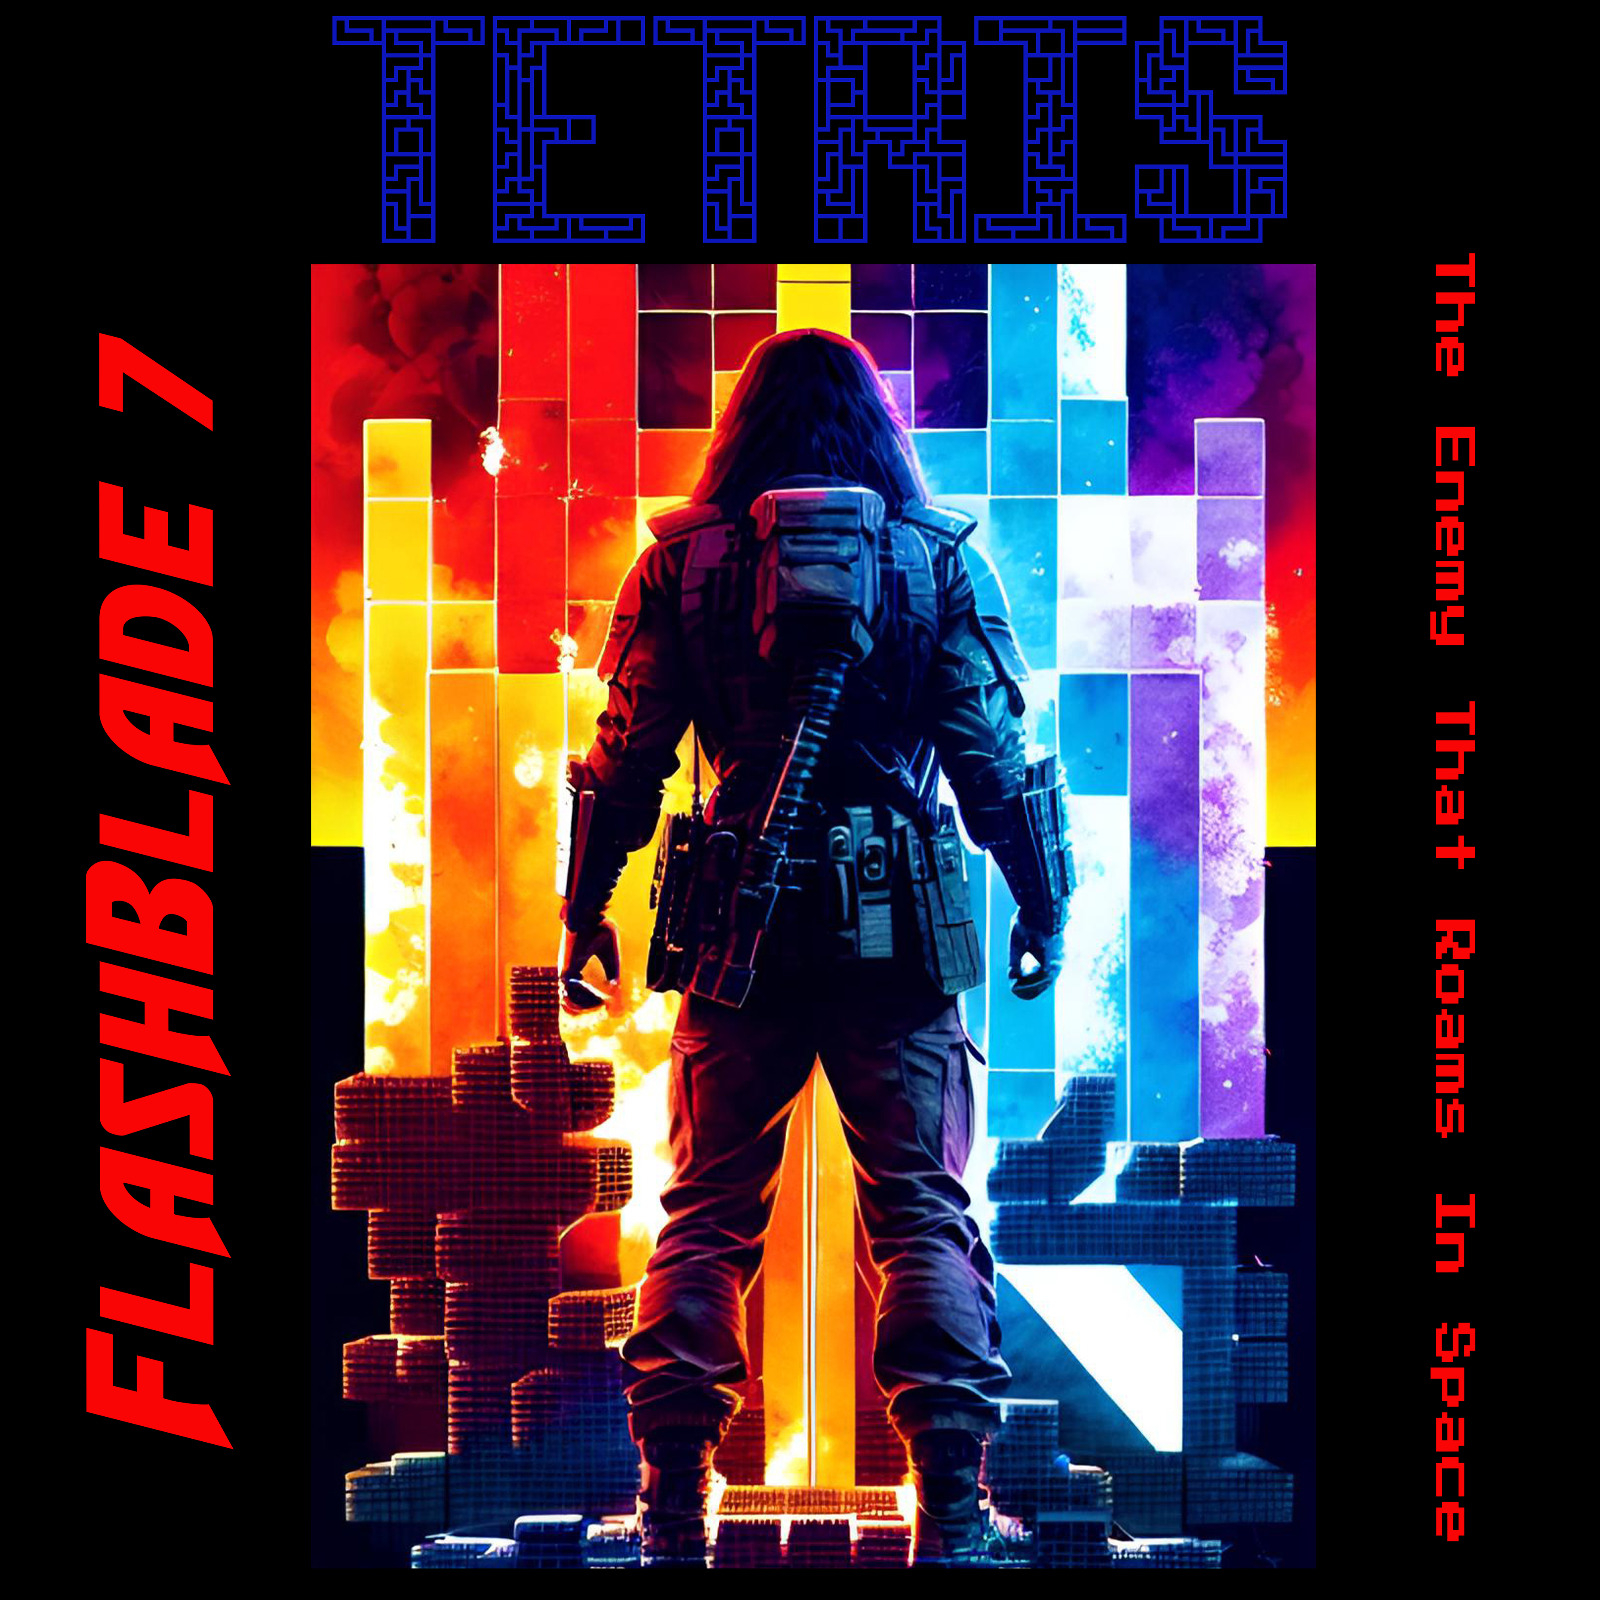 TETRIS is out now!